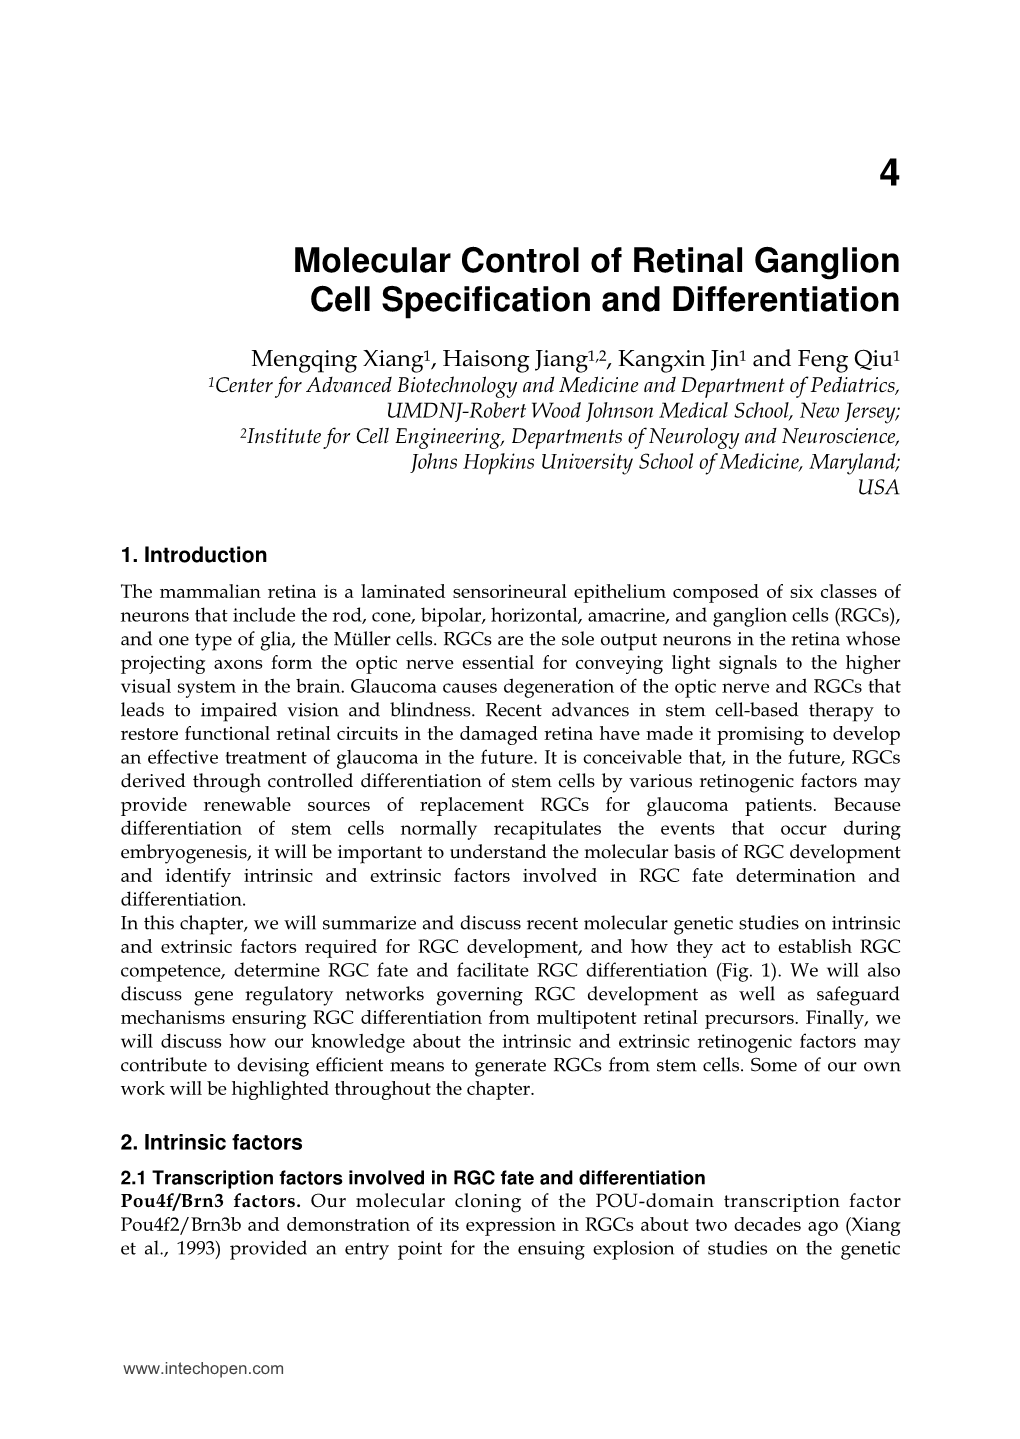 Molecular Control of Retinal Ganglion Cell Specification and Differentiation